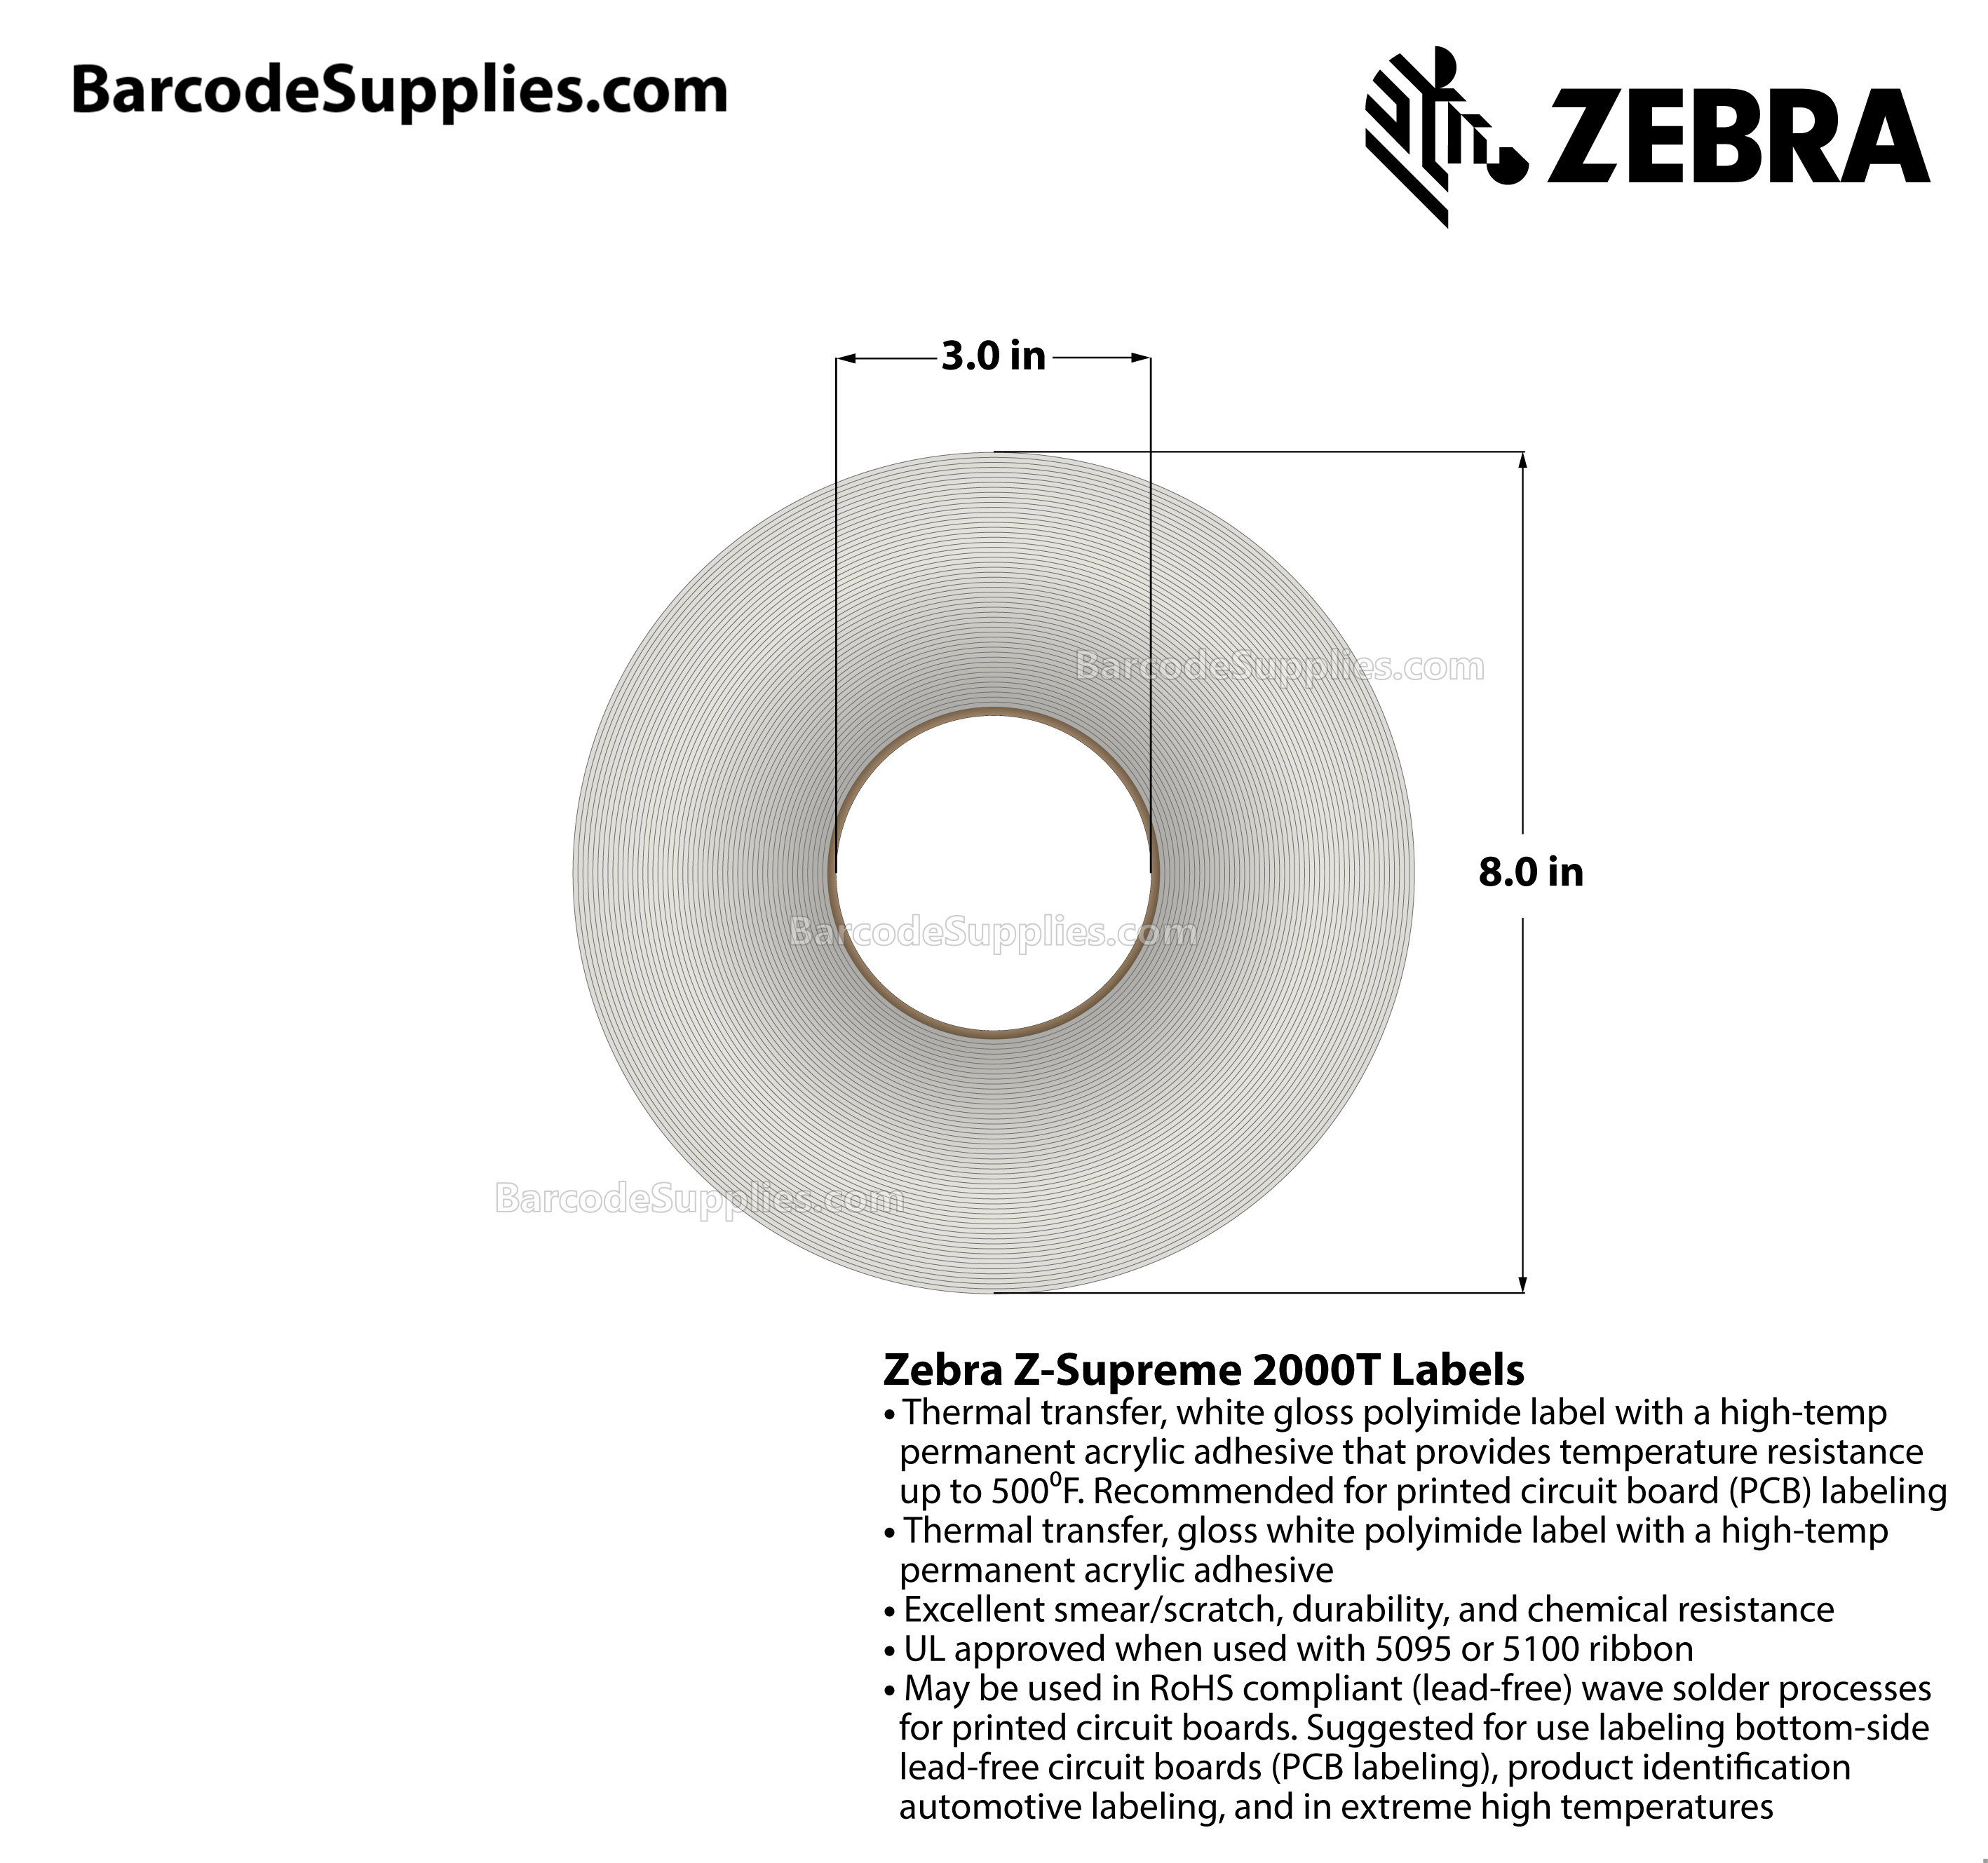 0.375 x 0.375 Thermal Transfer White Z-Supreme 2000T (7-Across) Labels With High-temp Adhesive - Perforated - 10003 Labels Per Roll - Carton Of 1 Rolls - 10003 Labels Total - MPN: 10023025